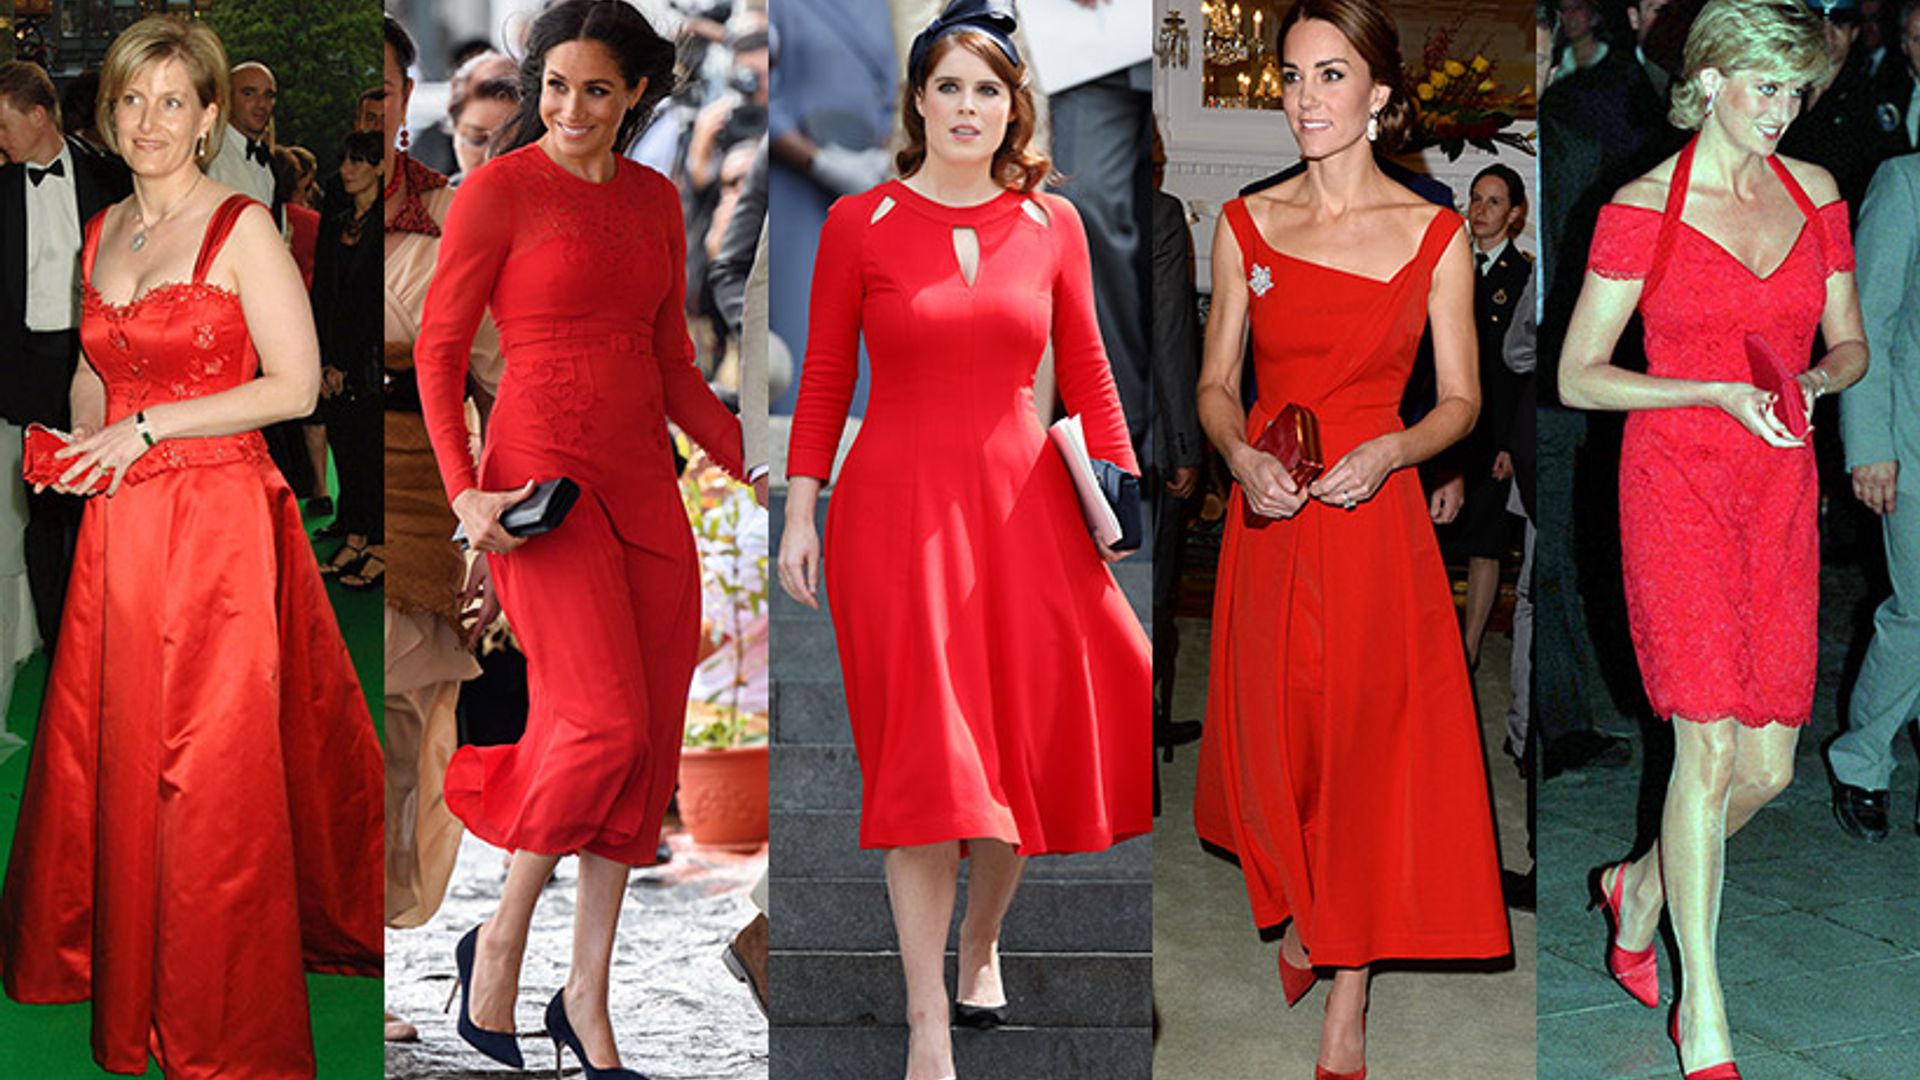 THIS is how to wear red according to the royal family